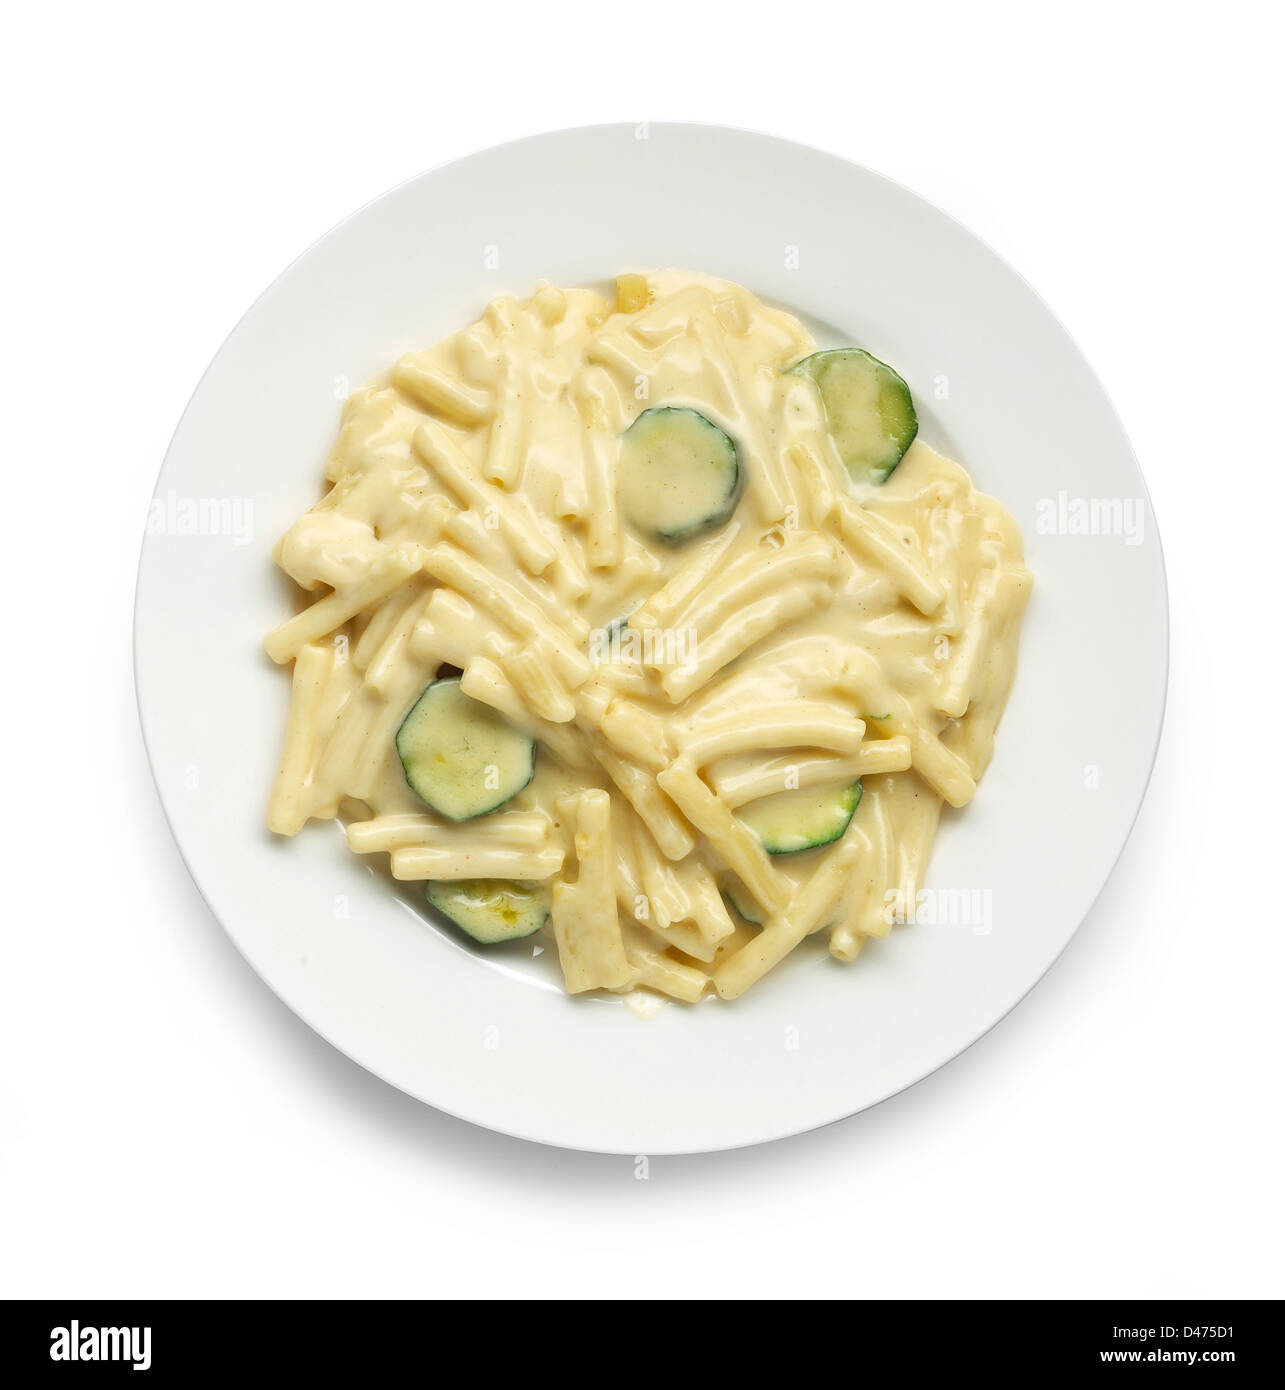 Plate of Pasta with courgette cut out white background Stock Photo